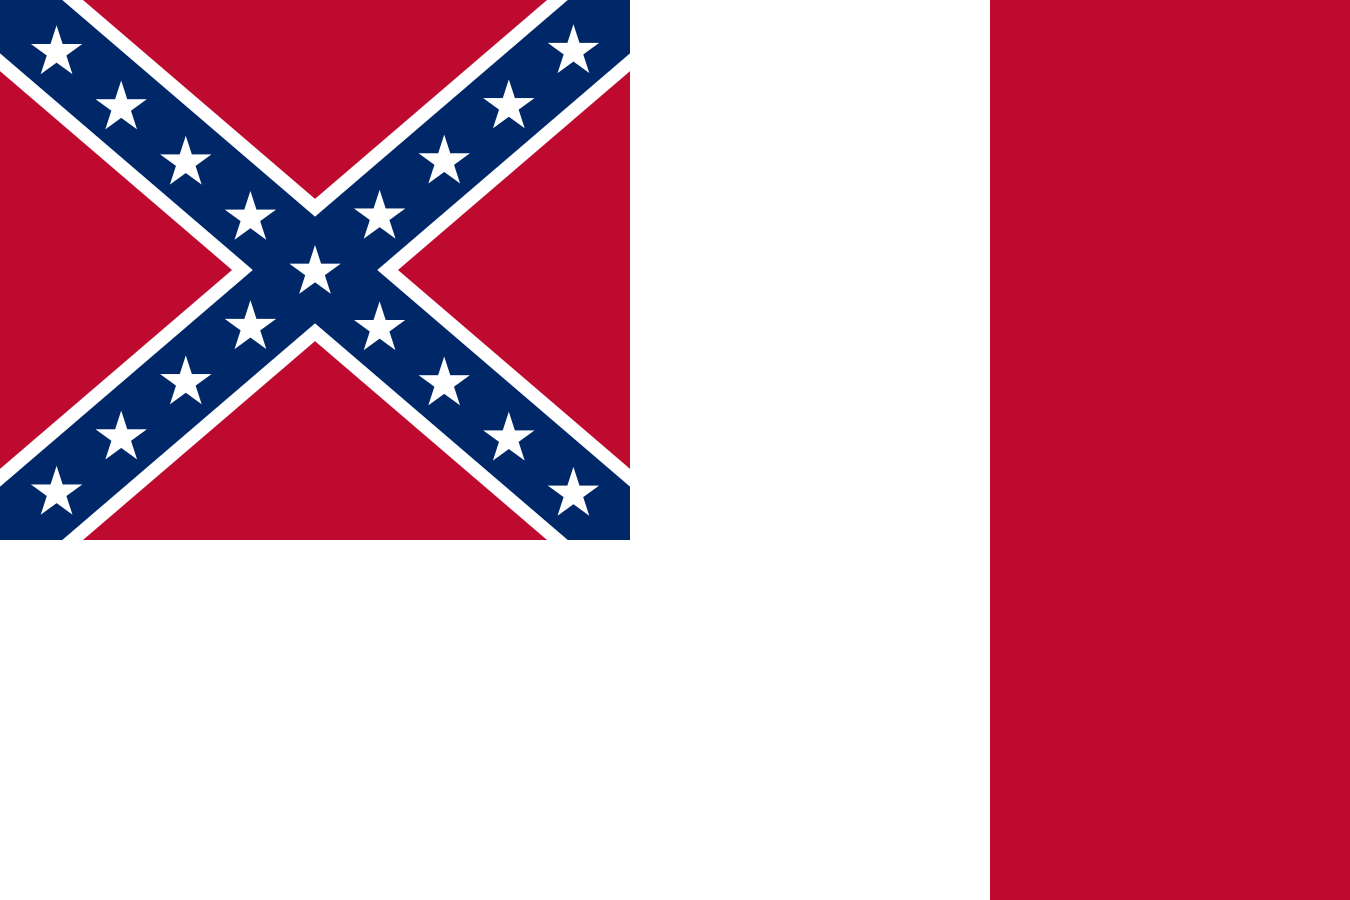 Flag_of_the_Confederate_States_(17 stars).png